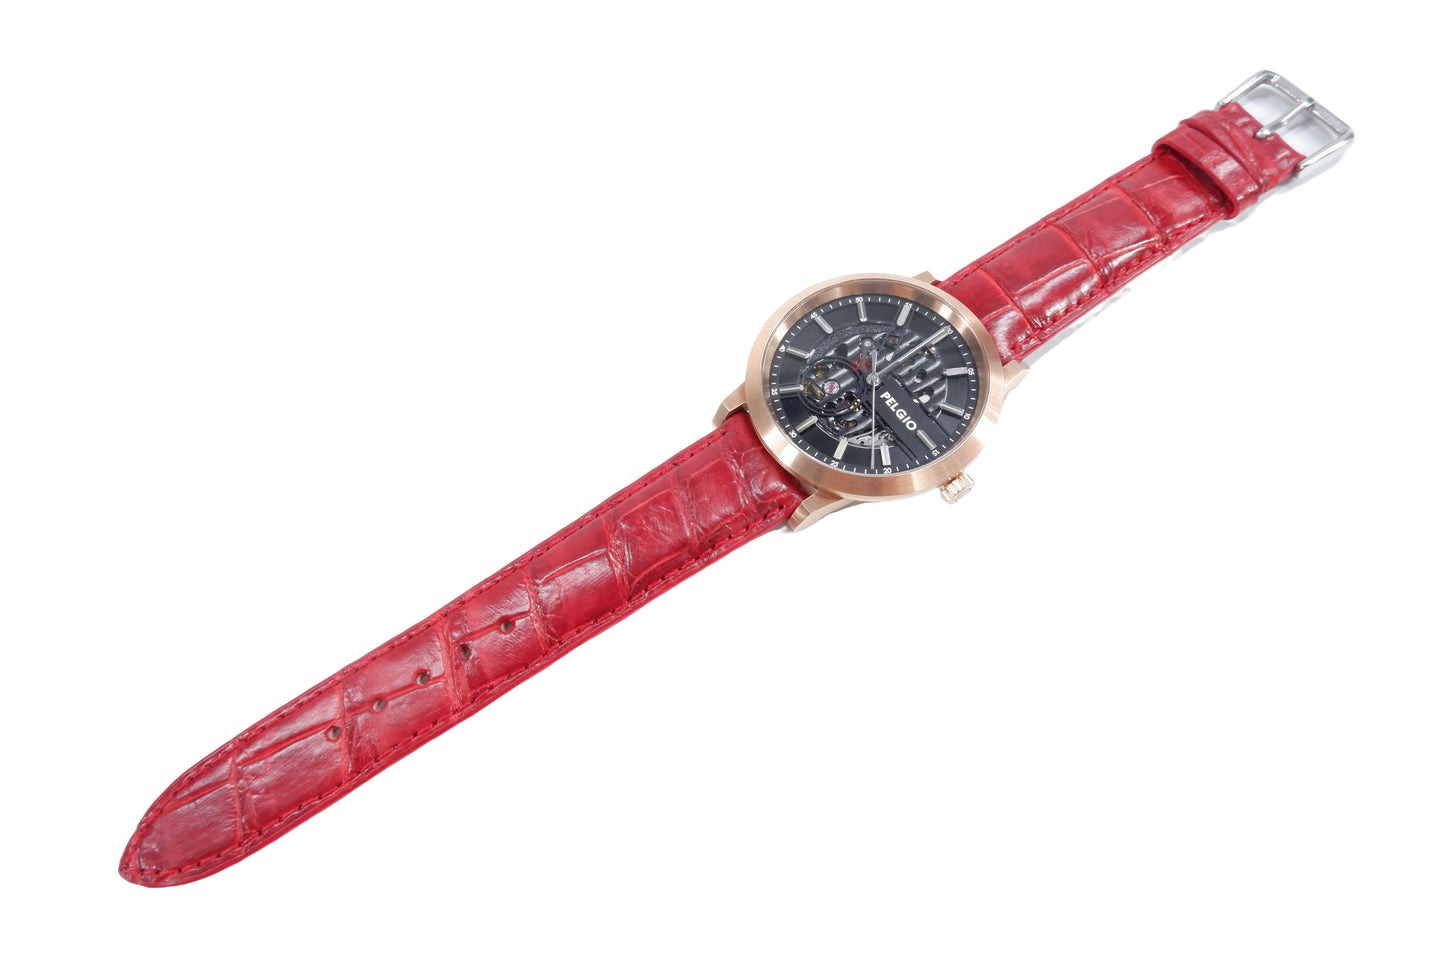 Genuine Crocodile Belly Skin Leather Quick Release Watch Strap Red Band with Buckle